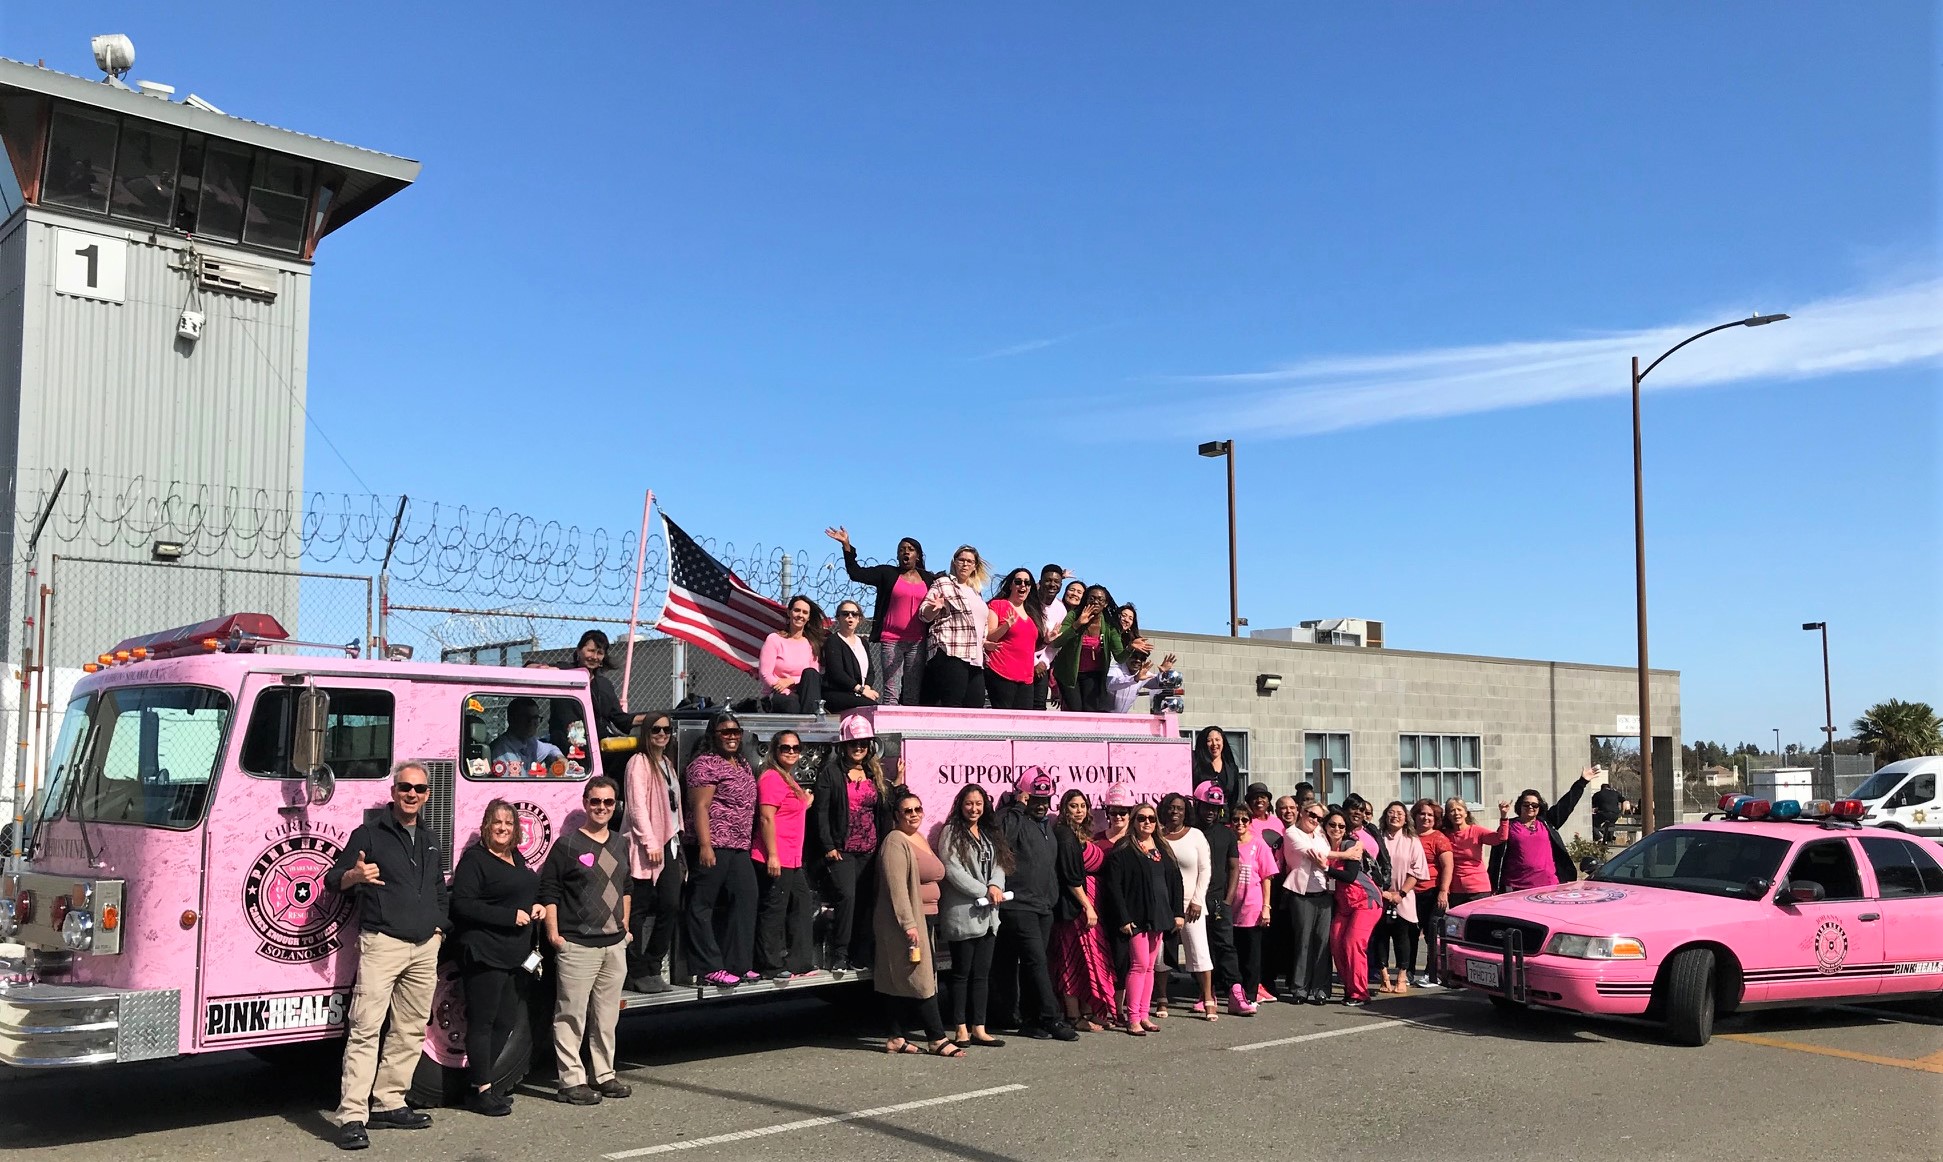 People wear pink and stand on top of a pink fire engine. A prison tower and fence can be seen in the background.